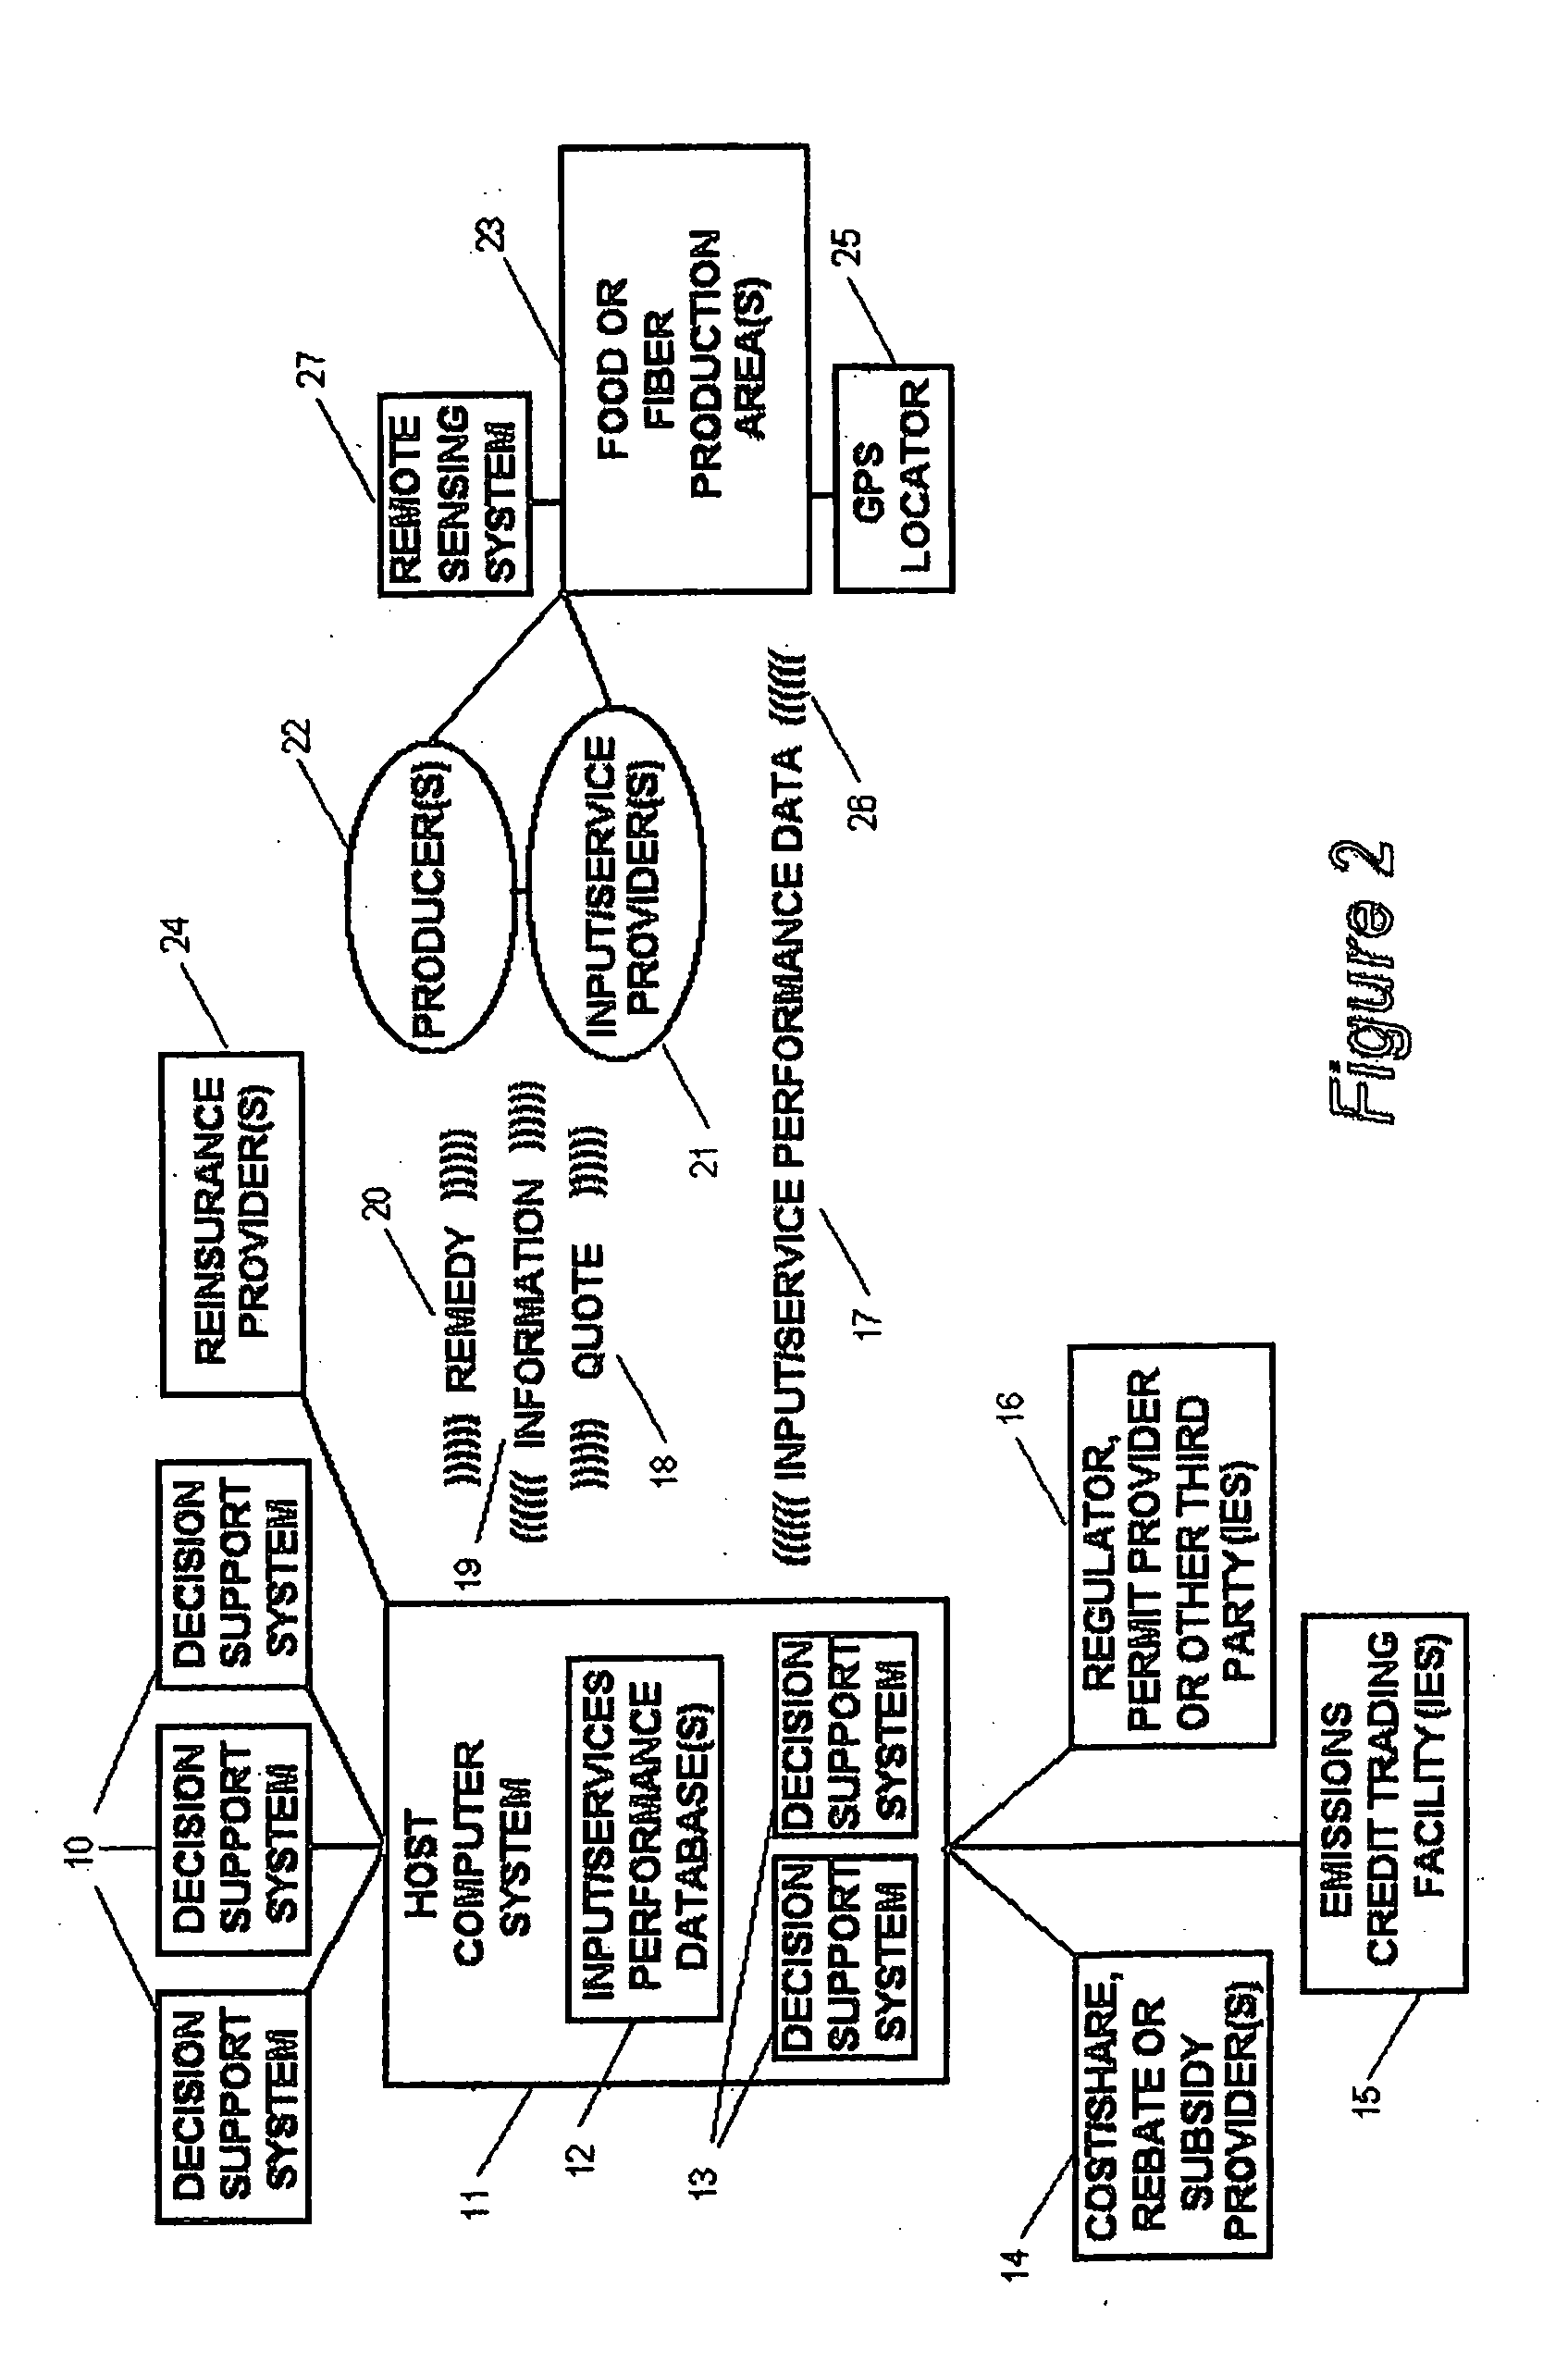 Method for quoting and contracting for management of inputs and services under a commercial service agreement, with a service loss guaranty or insurance policy and using an information management system